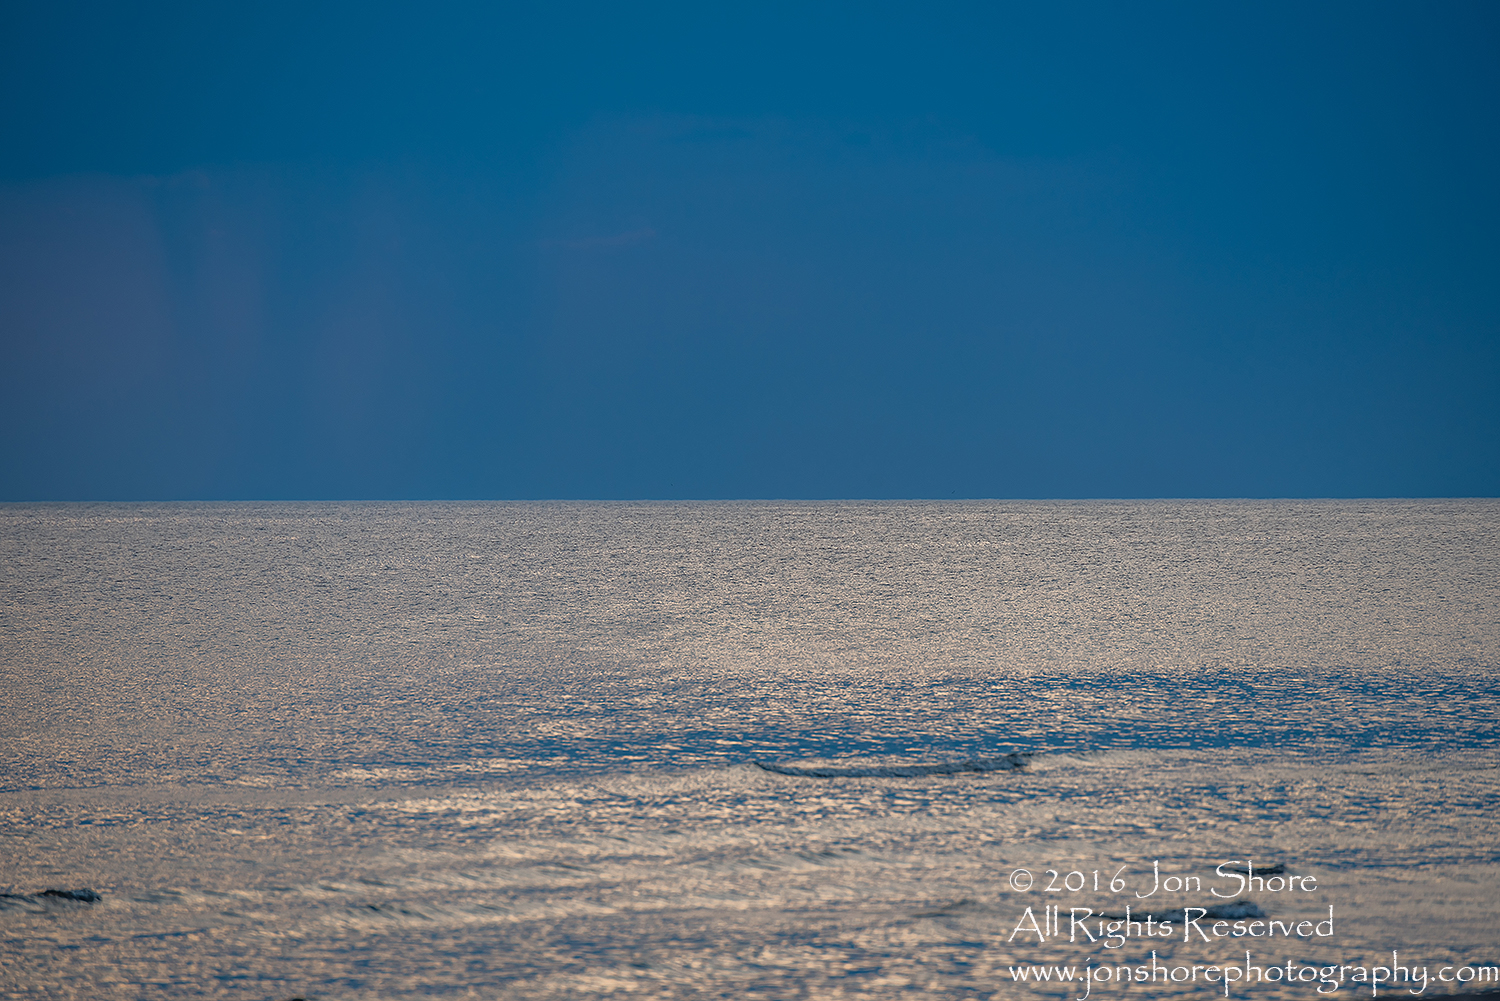 Silver Baltic Sea and Blue Sky. Tamron 300mm